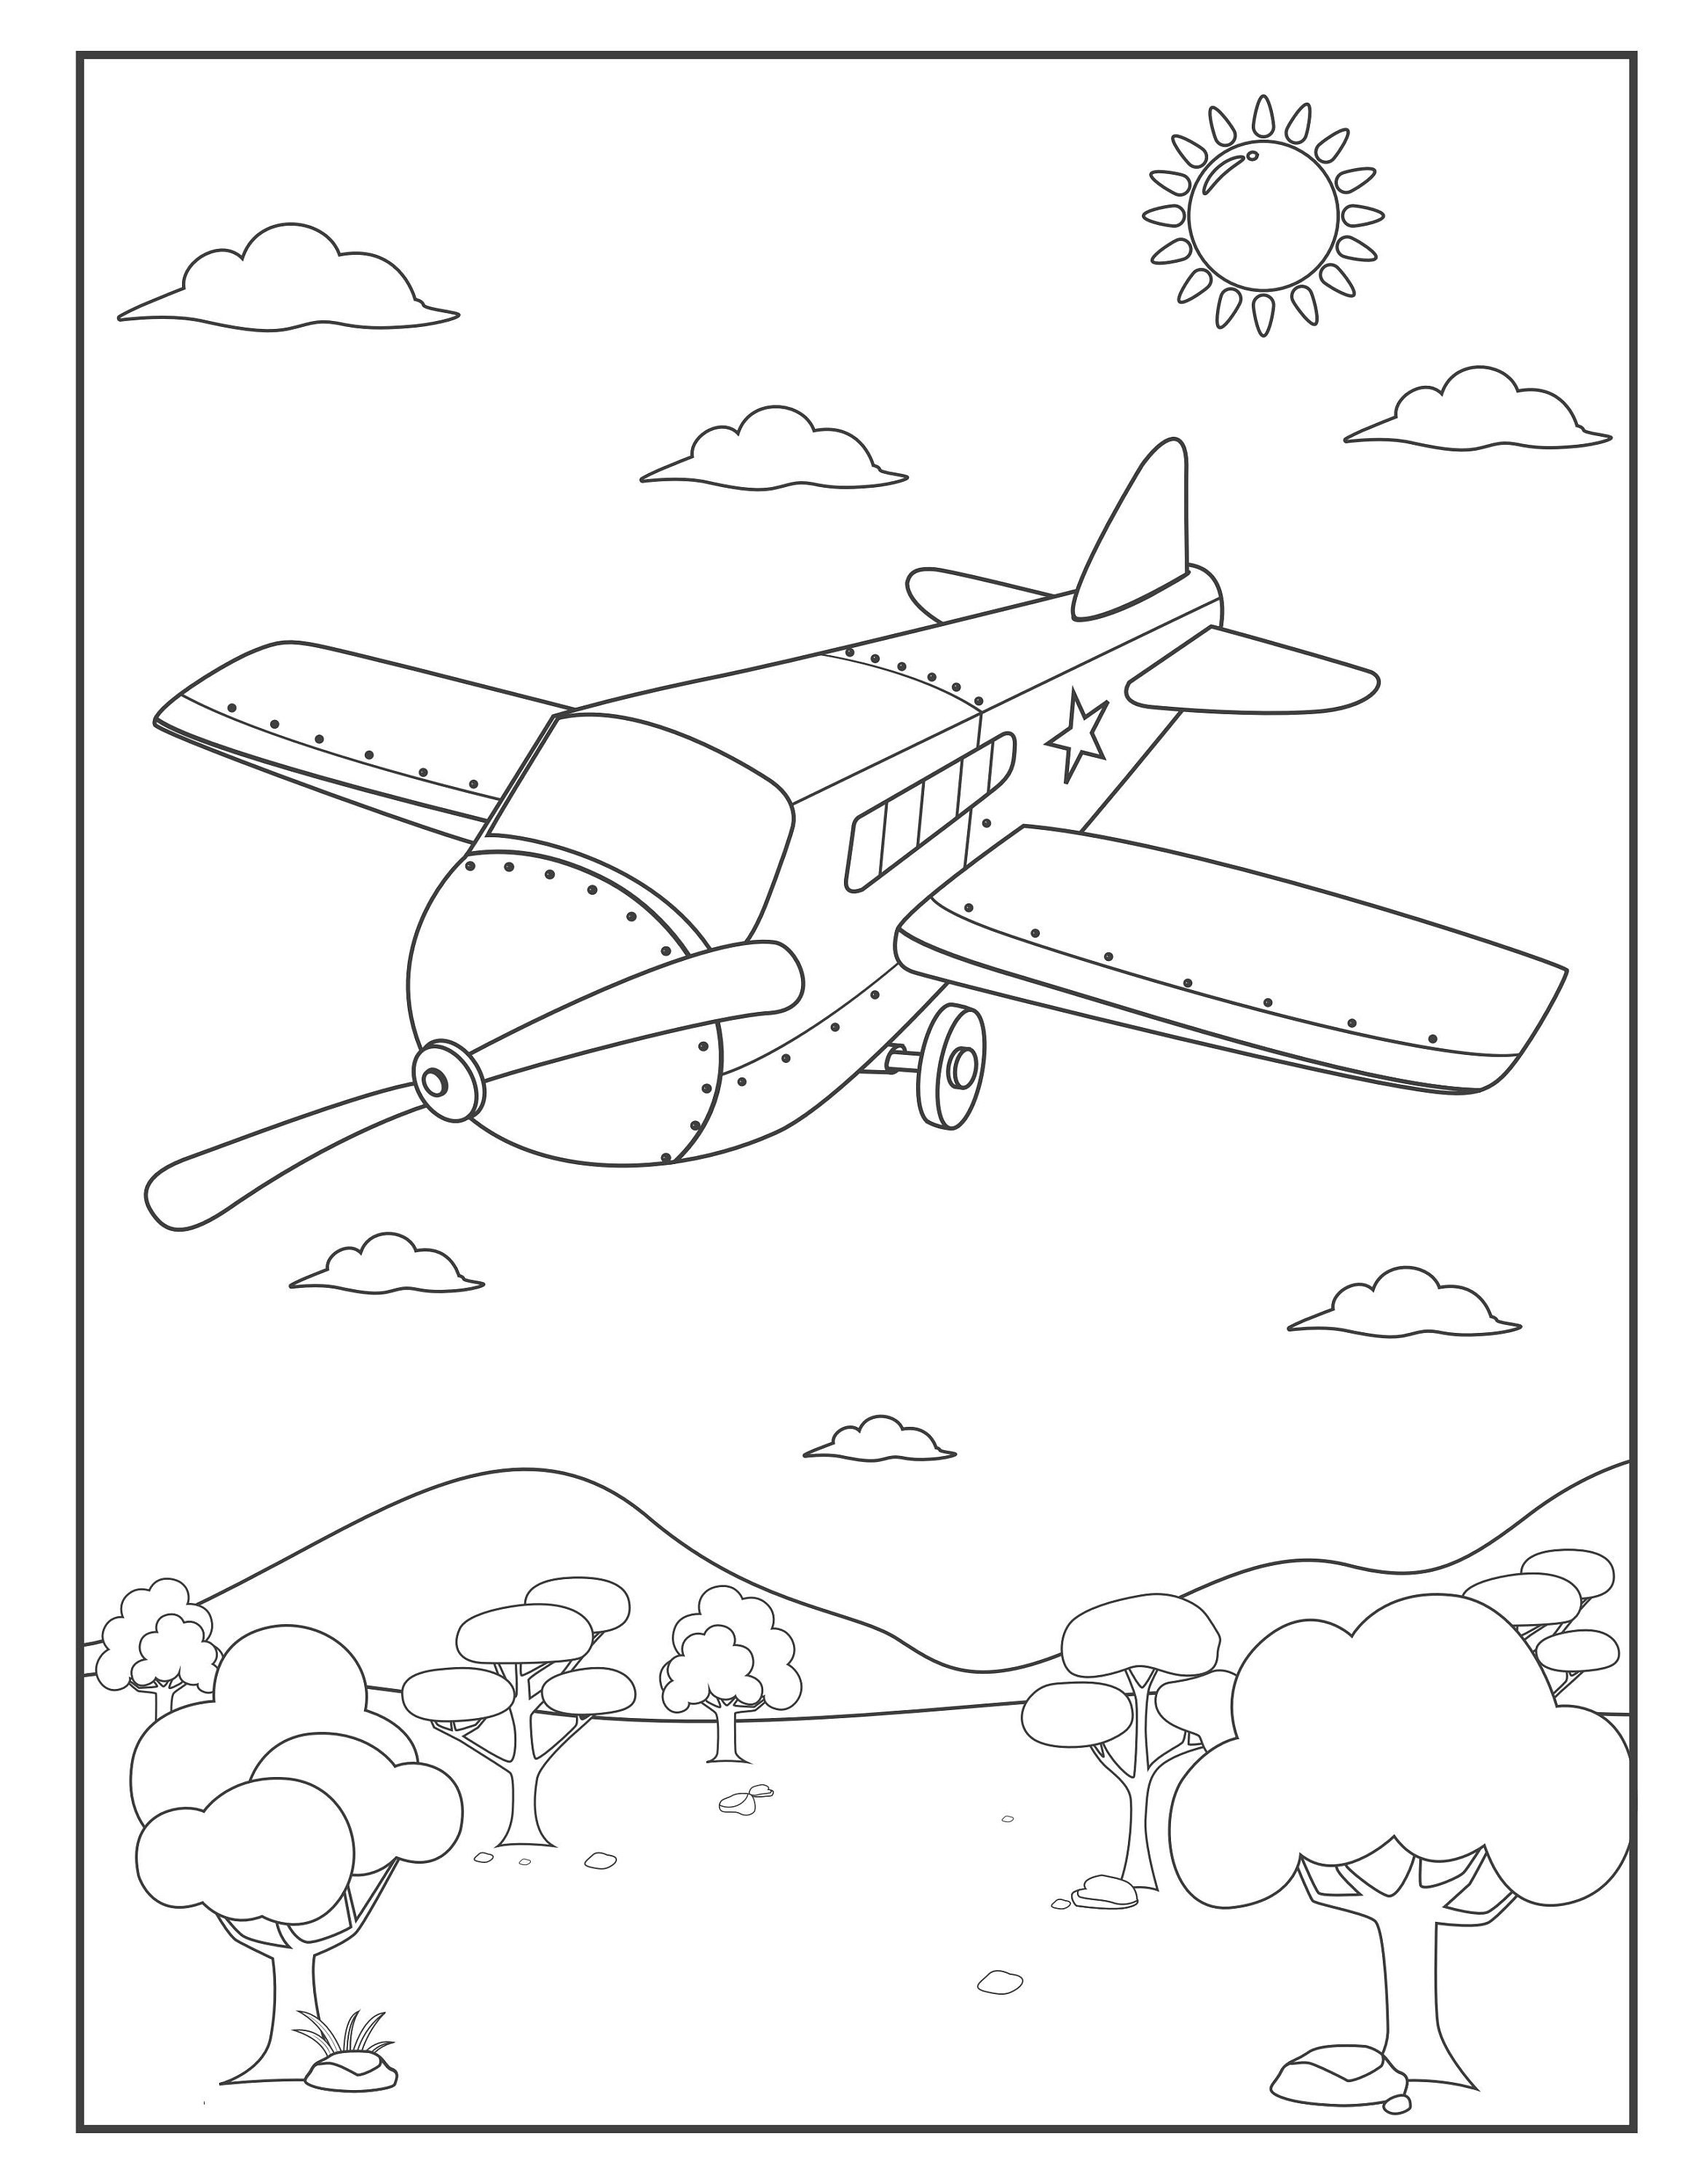 My Airplane Coloring Book: Airplanes Coloring Book for kids, toddlers 2-5, 4-6,6-8, for all ages, +40 beautiful plane;(Kidd's Coloring Books)  (Paperback)